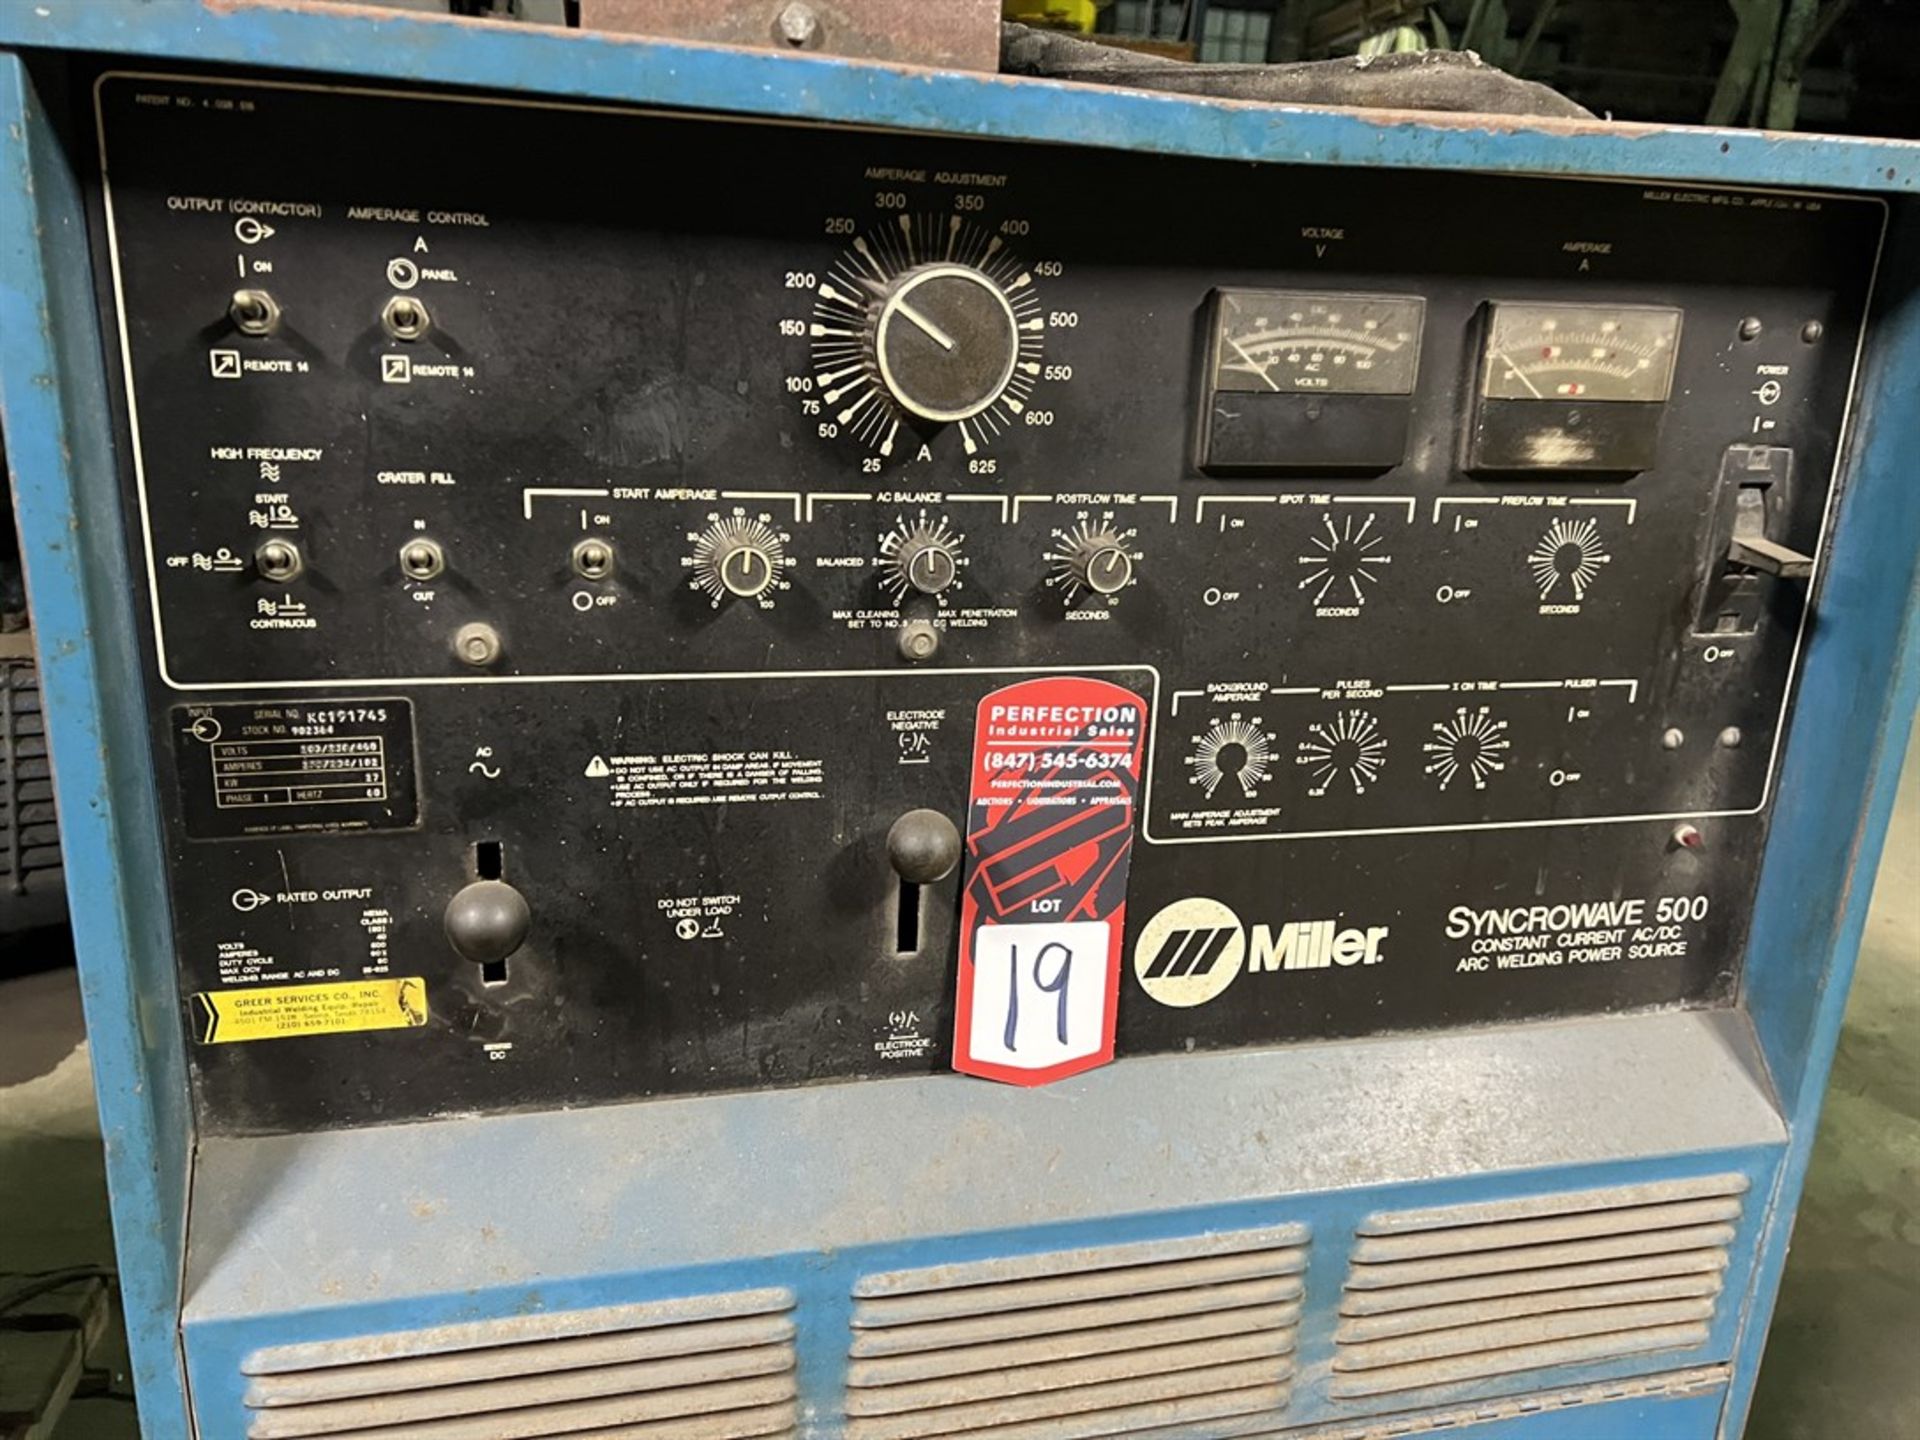 MILLER Syncrowave 500 Arc Welding Power Source, s/n KC191745 (Building 39) - Image 3 of 4